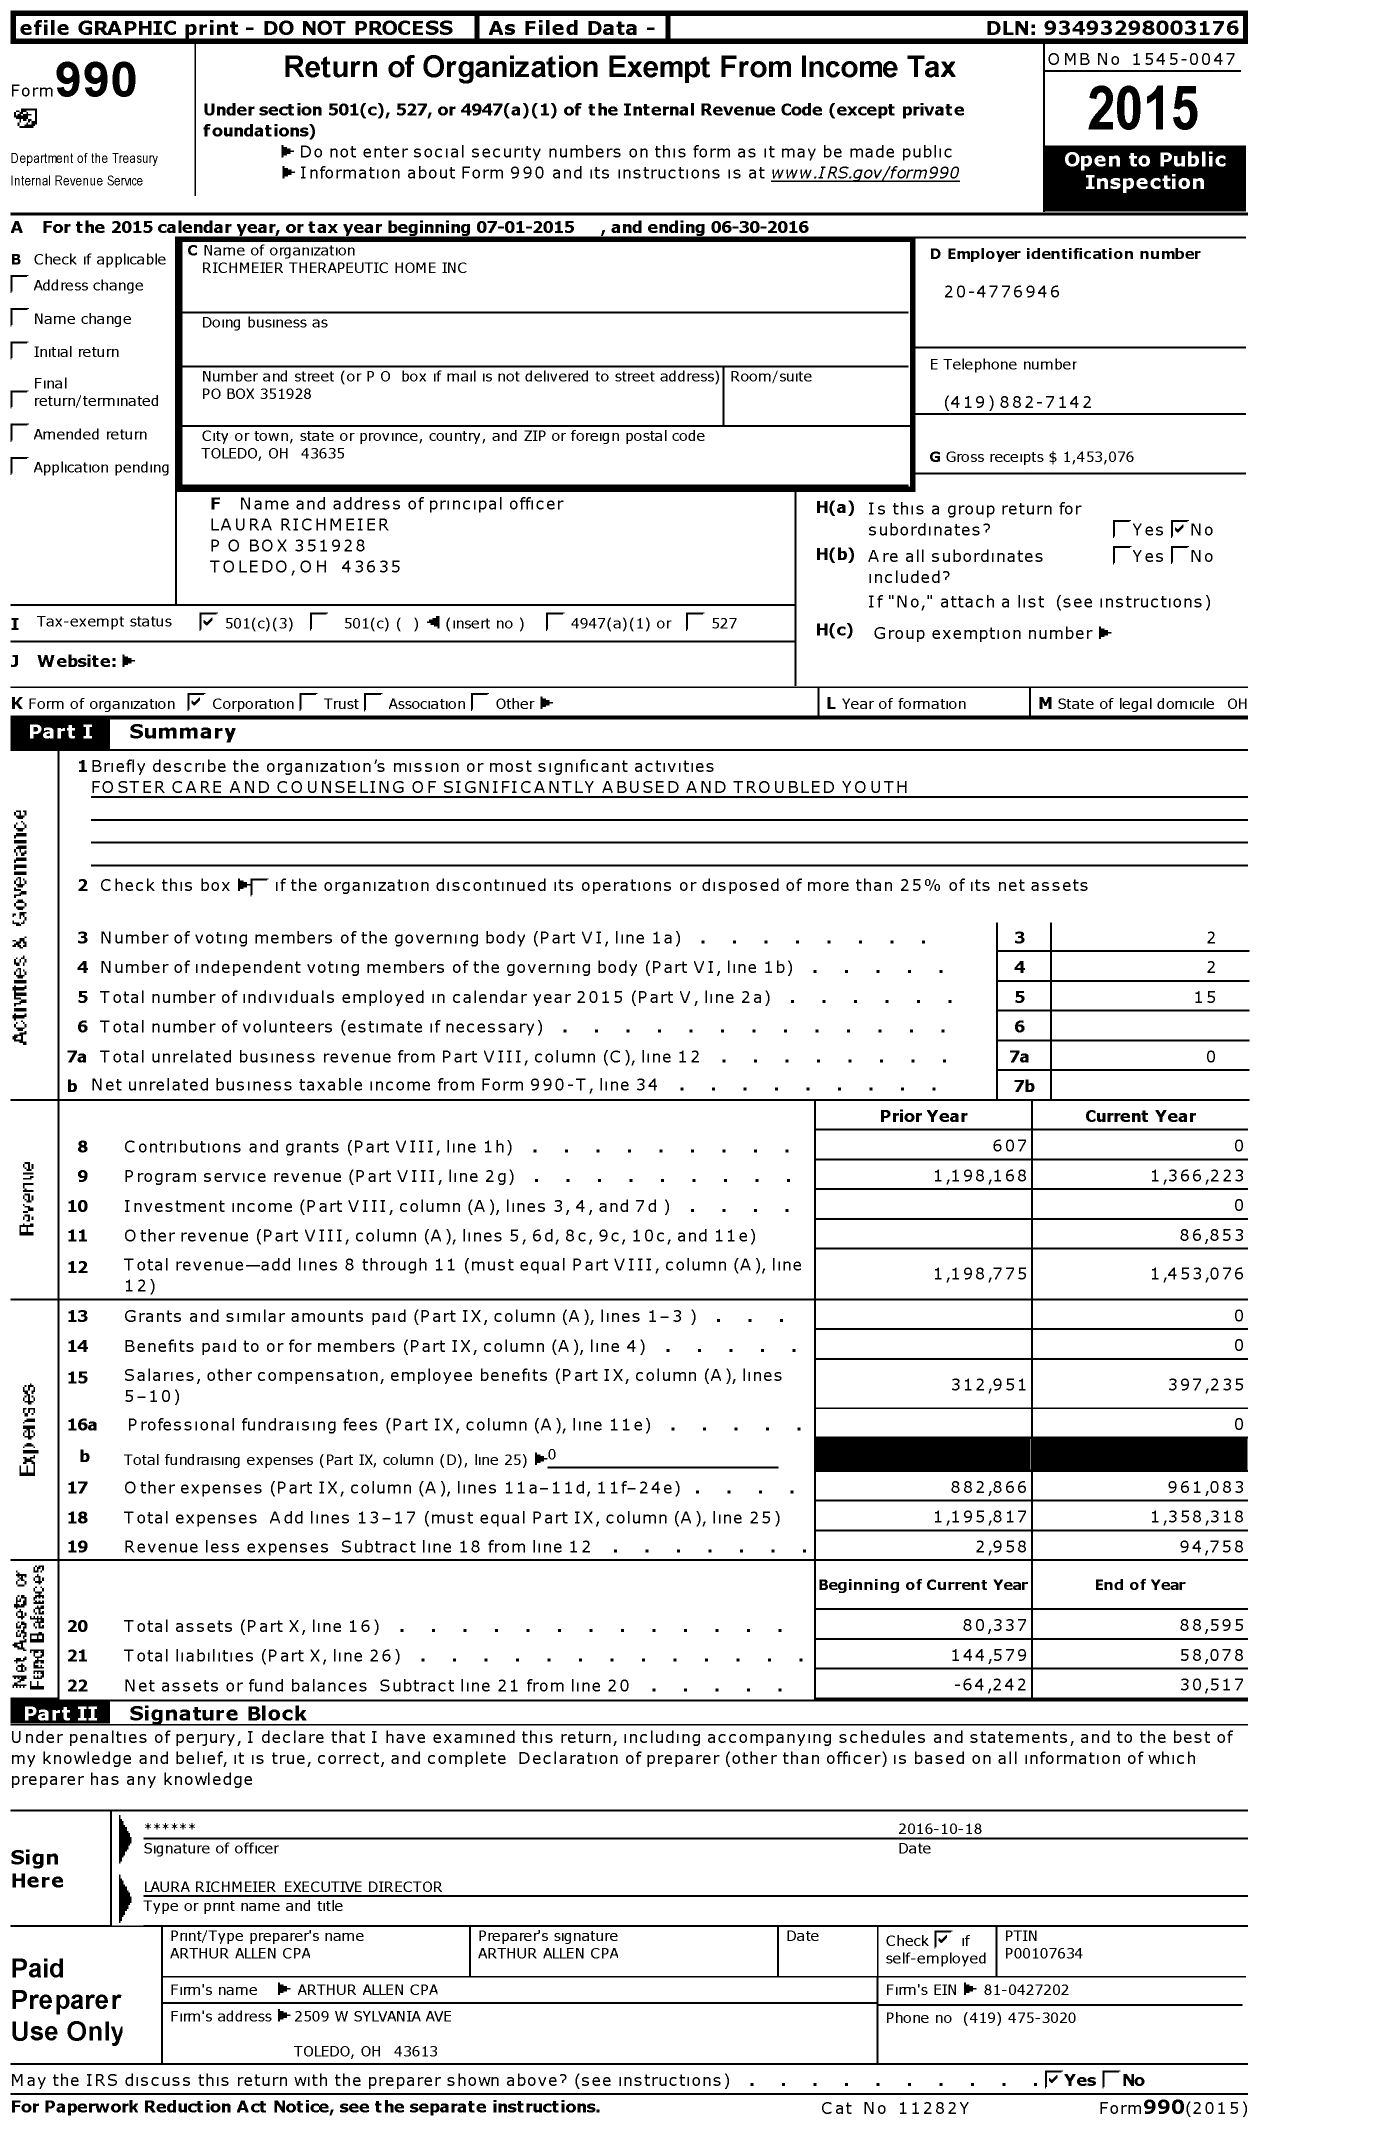 Image of first page of 2015 Form 990 for Richmeier Therapeutic Home